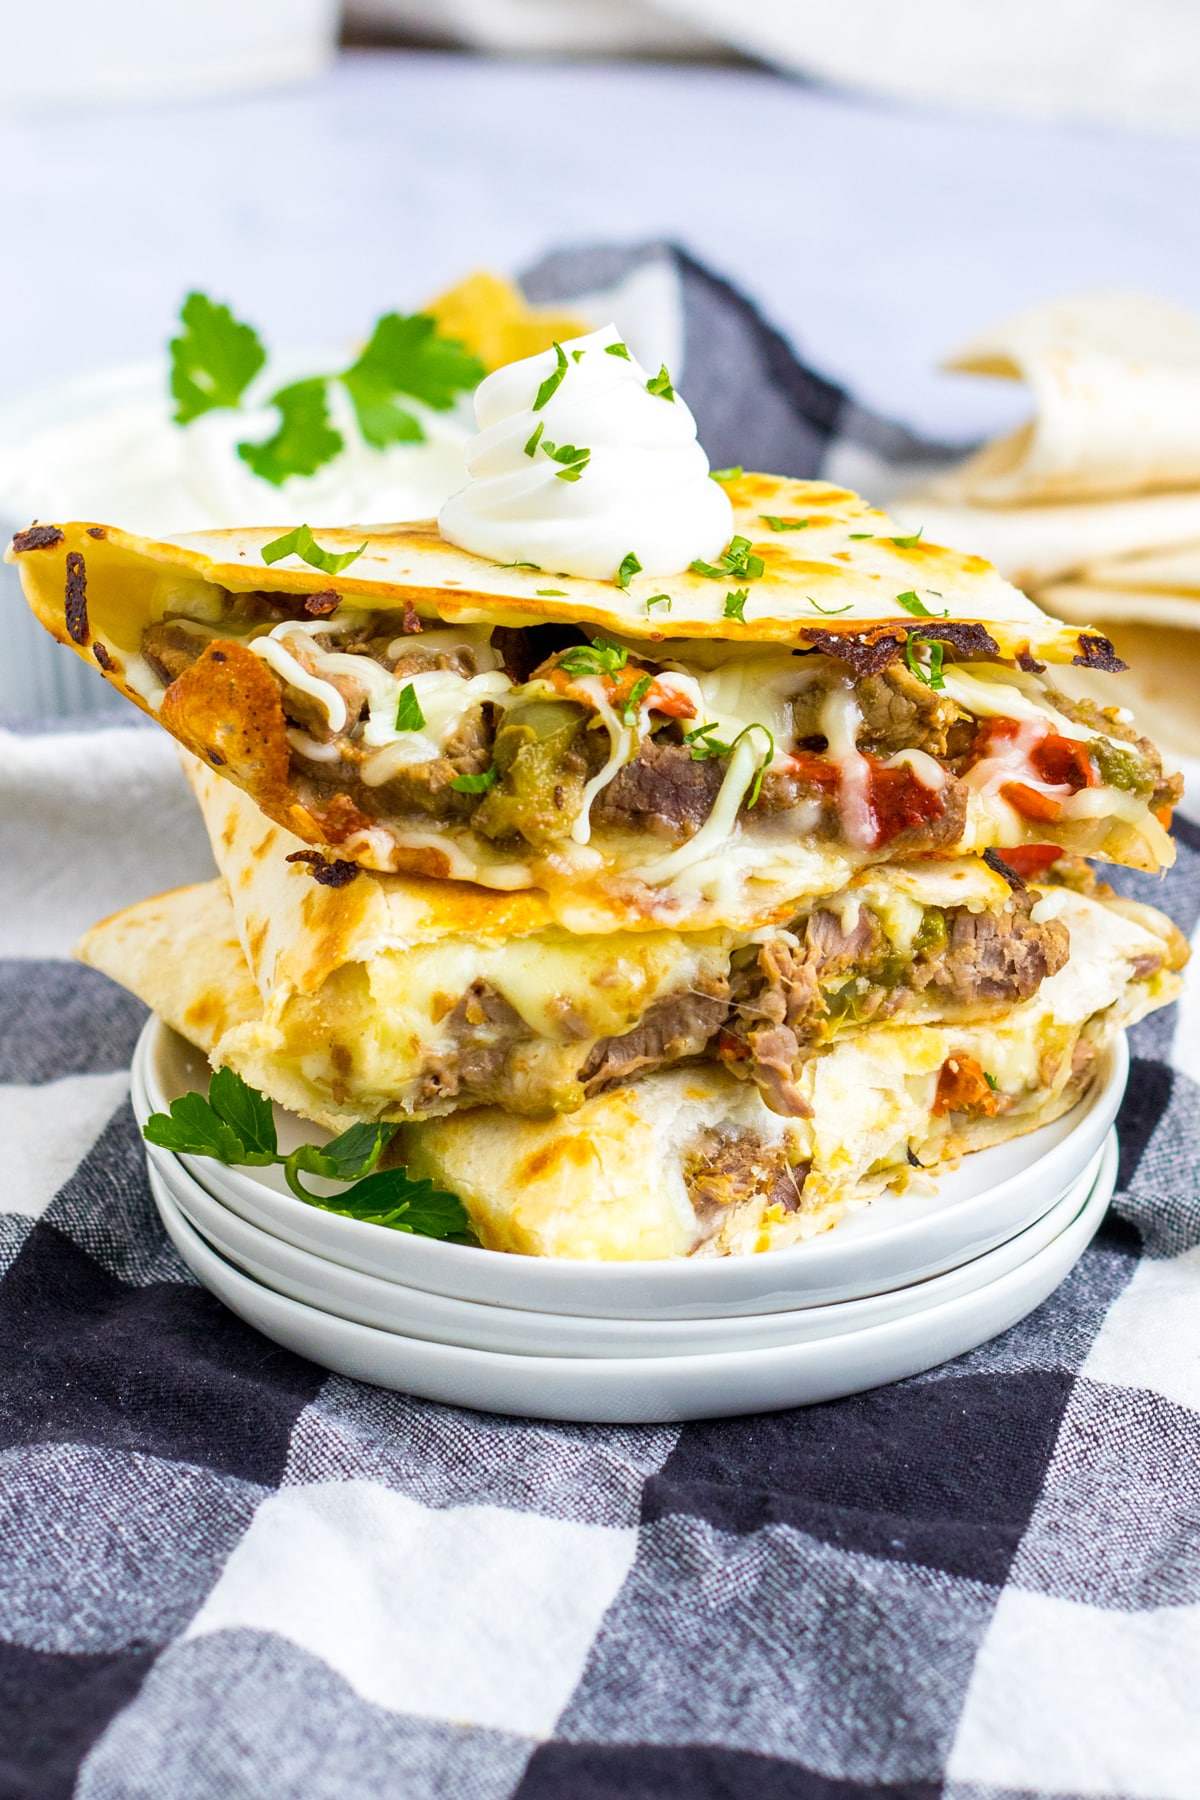 Pieces of Slow Cooker Cheesesteak Quesadillas on a white plate with checkered linen